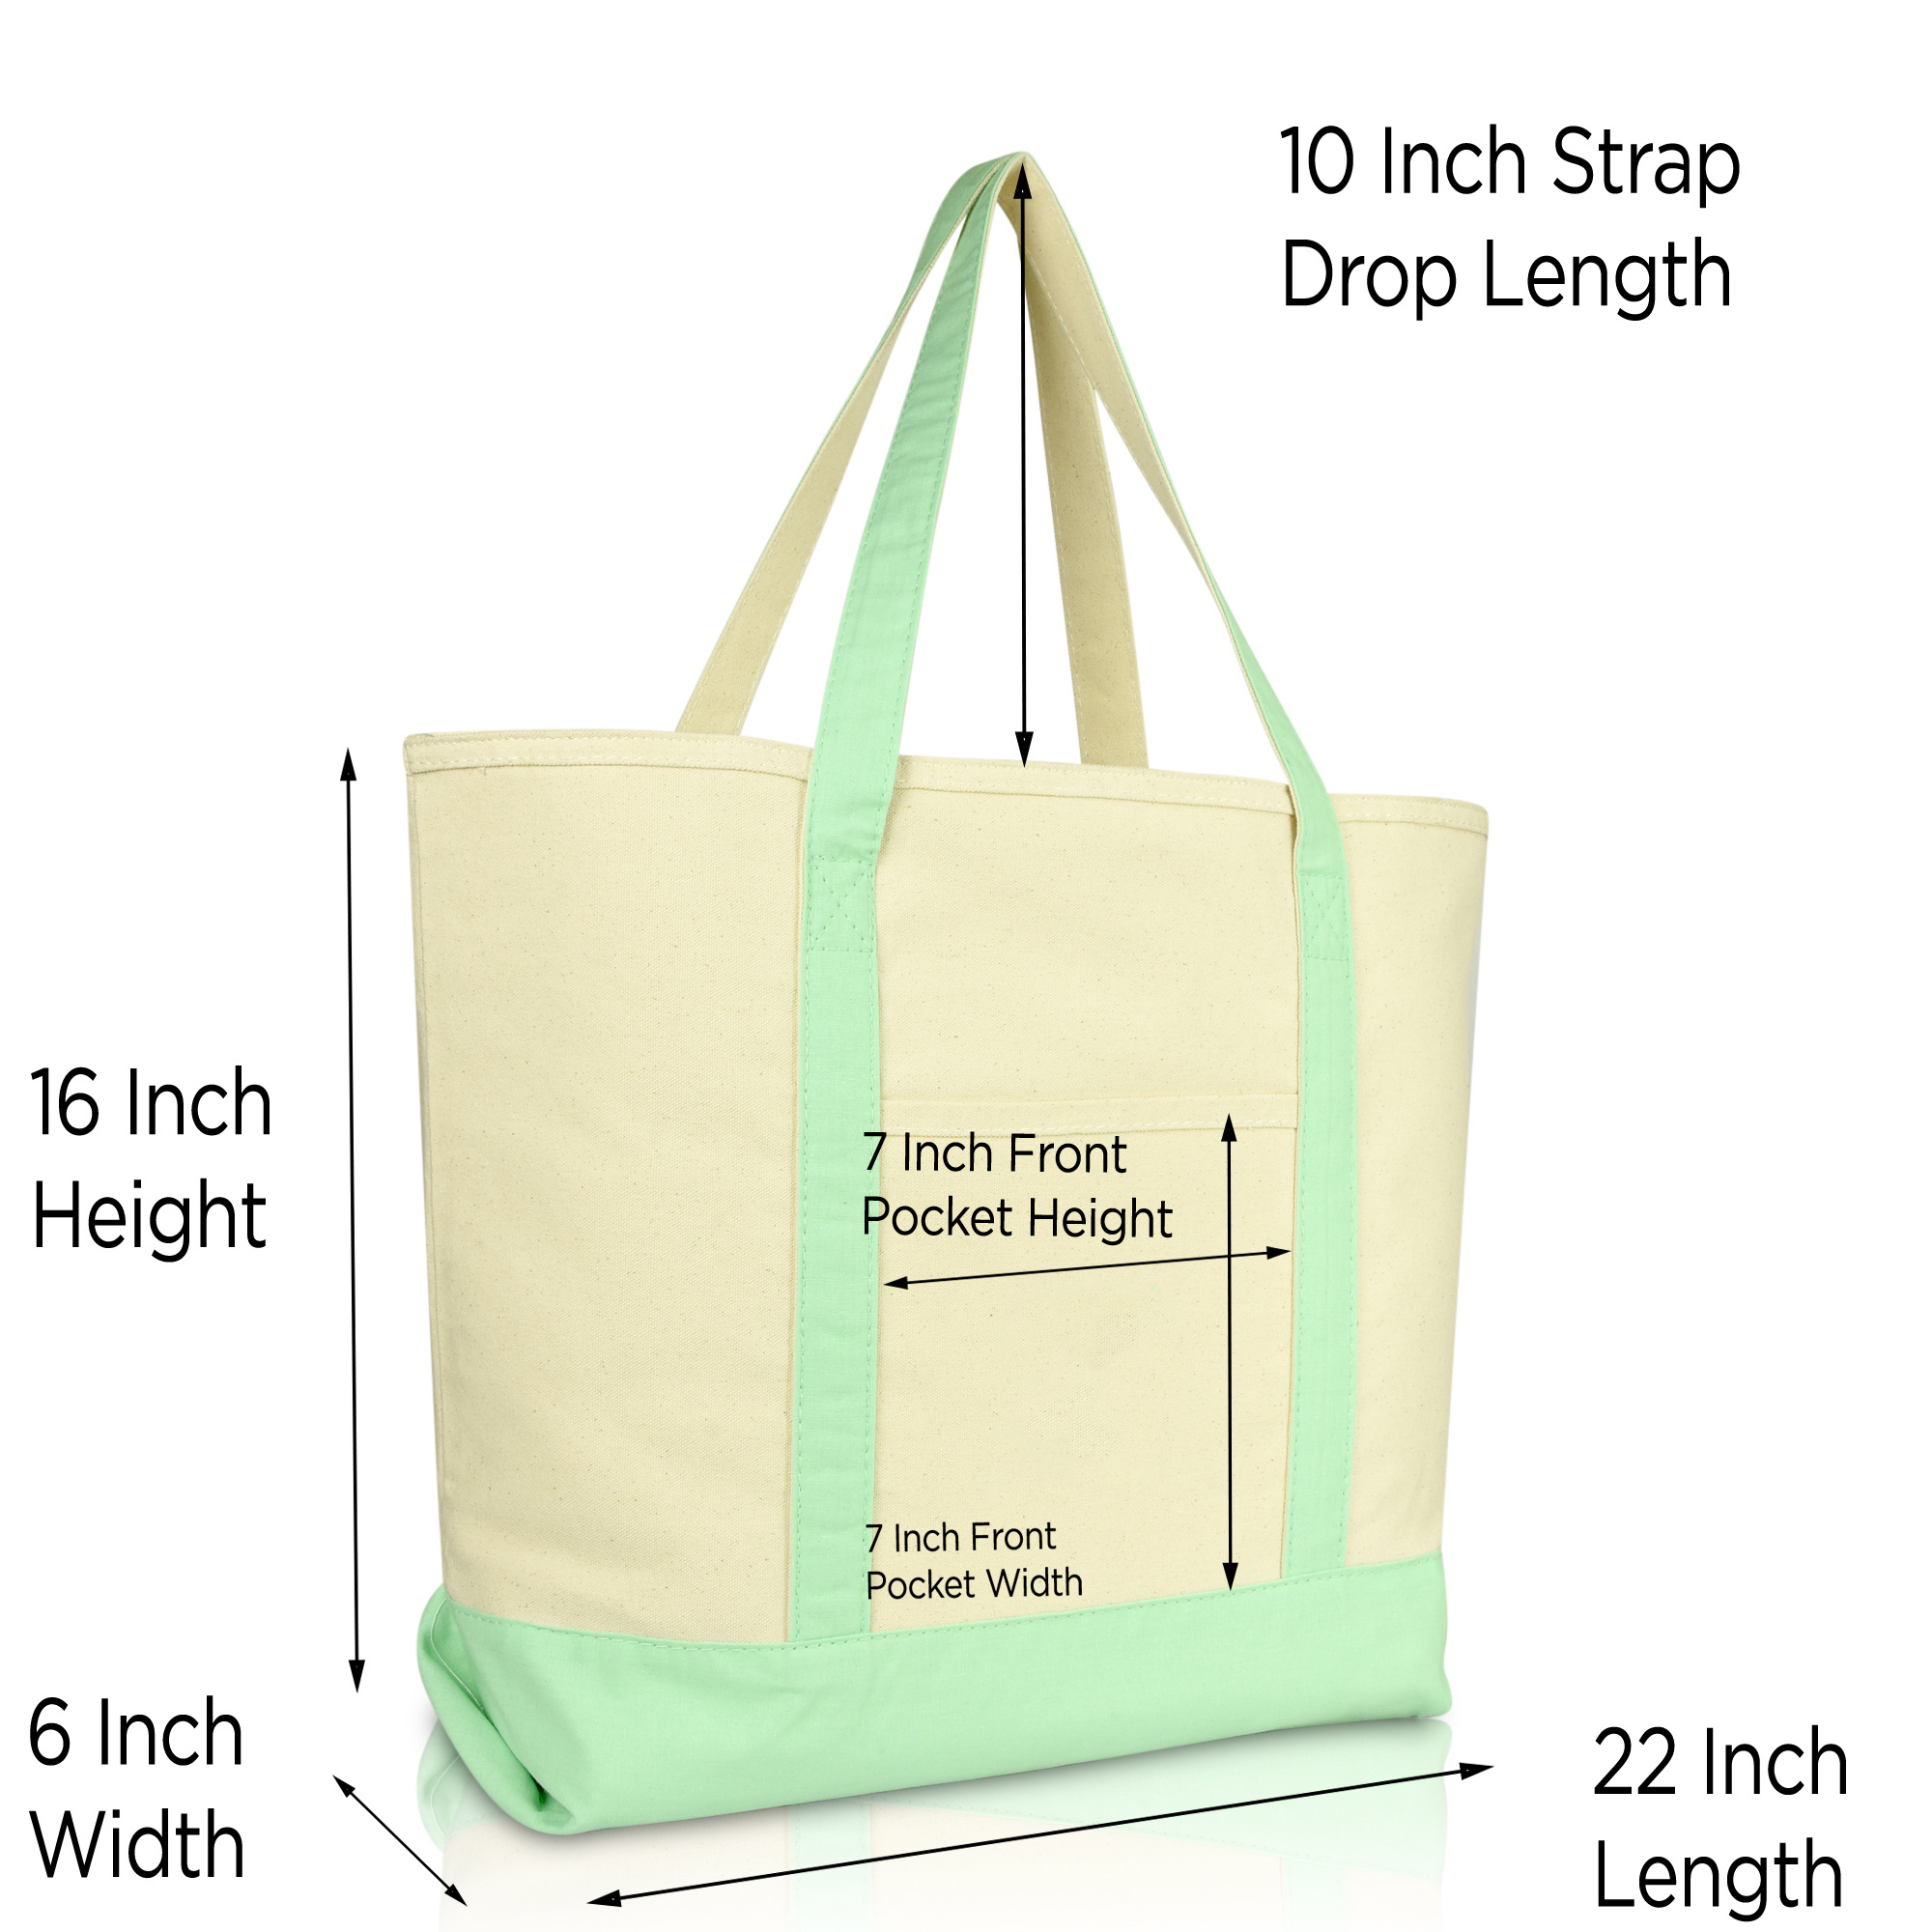 DALIX 22" Extra Large Cotton Canvas Zippered Shopping Tote Grocery Bag in Mint Green - image 2 of 6